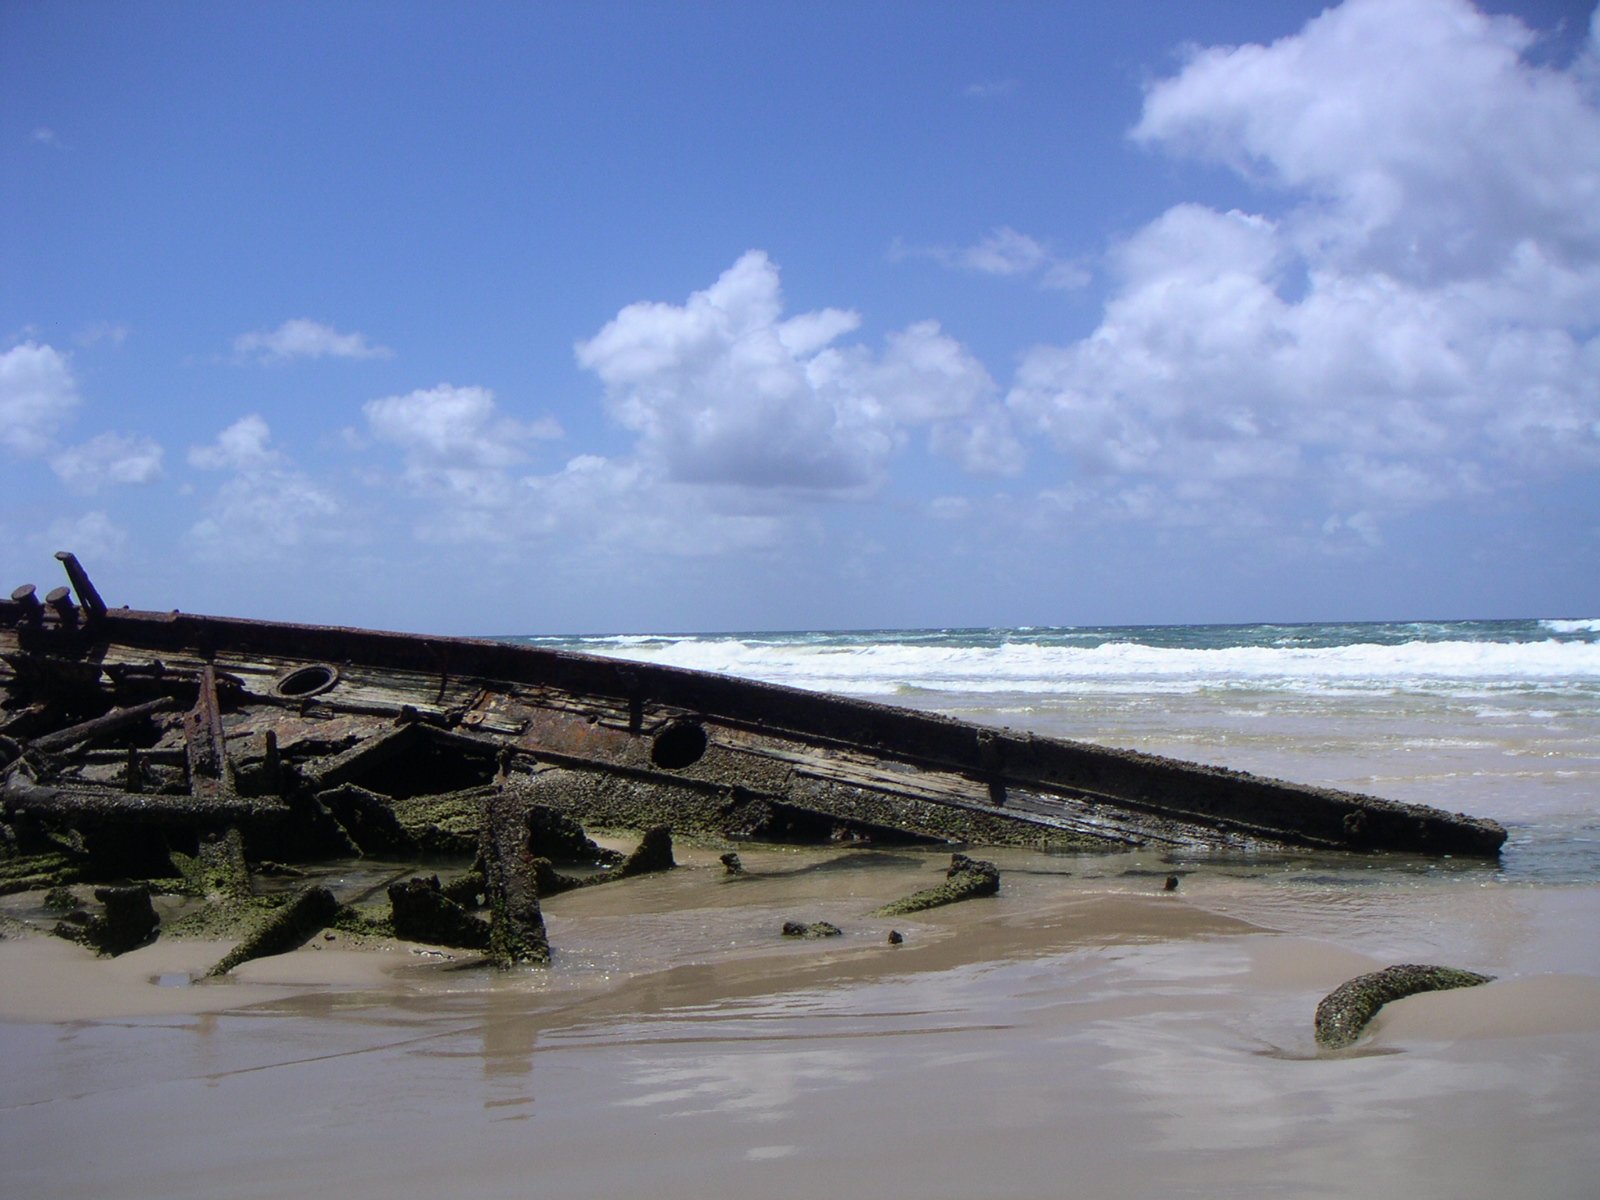 a rusted old wooden boat is lying in the sand